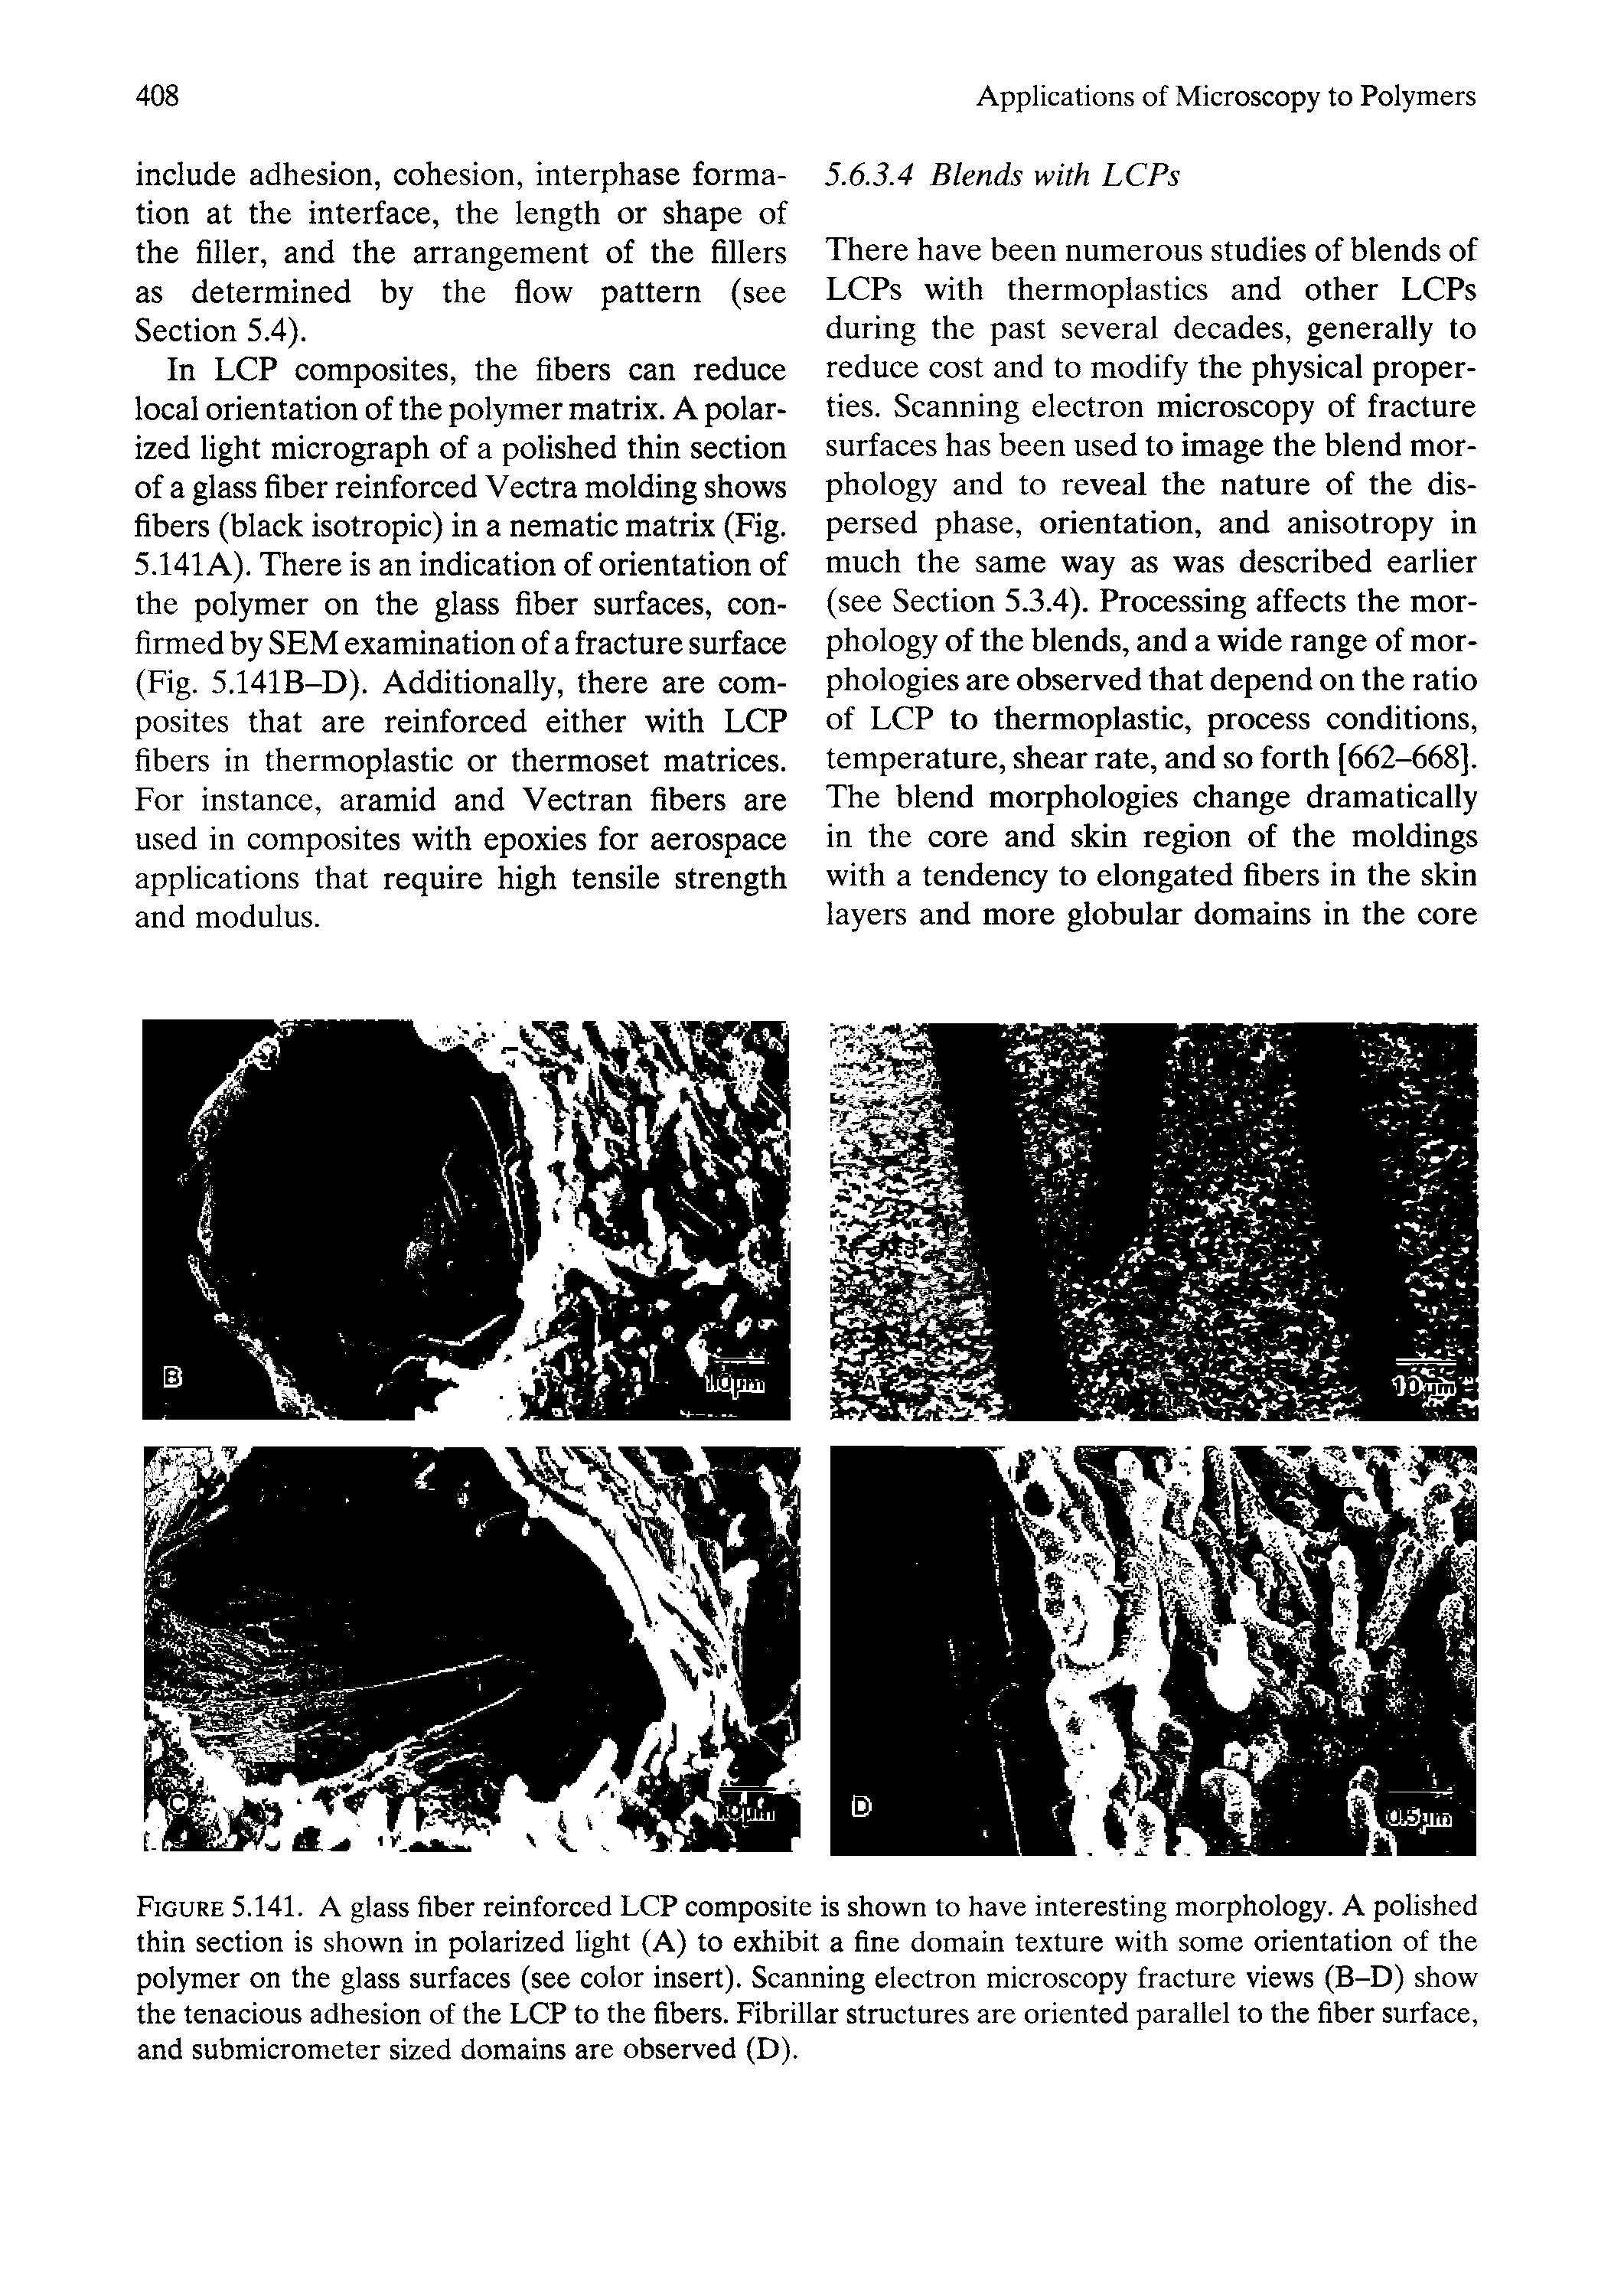 Figure 5.141. A glass fiber reinforced LCP composite is shown to have interesting morphology. A polished thin section is shown in polarized light (A) to exhibit a fine domain texture with some orientation of the polymer on the glass surfaces (see color insert). Scanning electron microscopy fracture views (B-D) show the tenacious adhesion of the LCP to the fibers. Fibrillar structures are oriented parallel to the fiber surface, and submicrometer sized domains are observed (D).